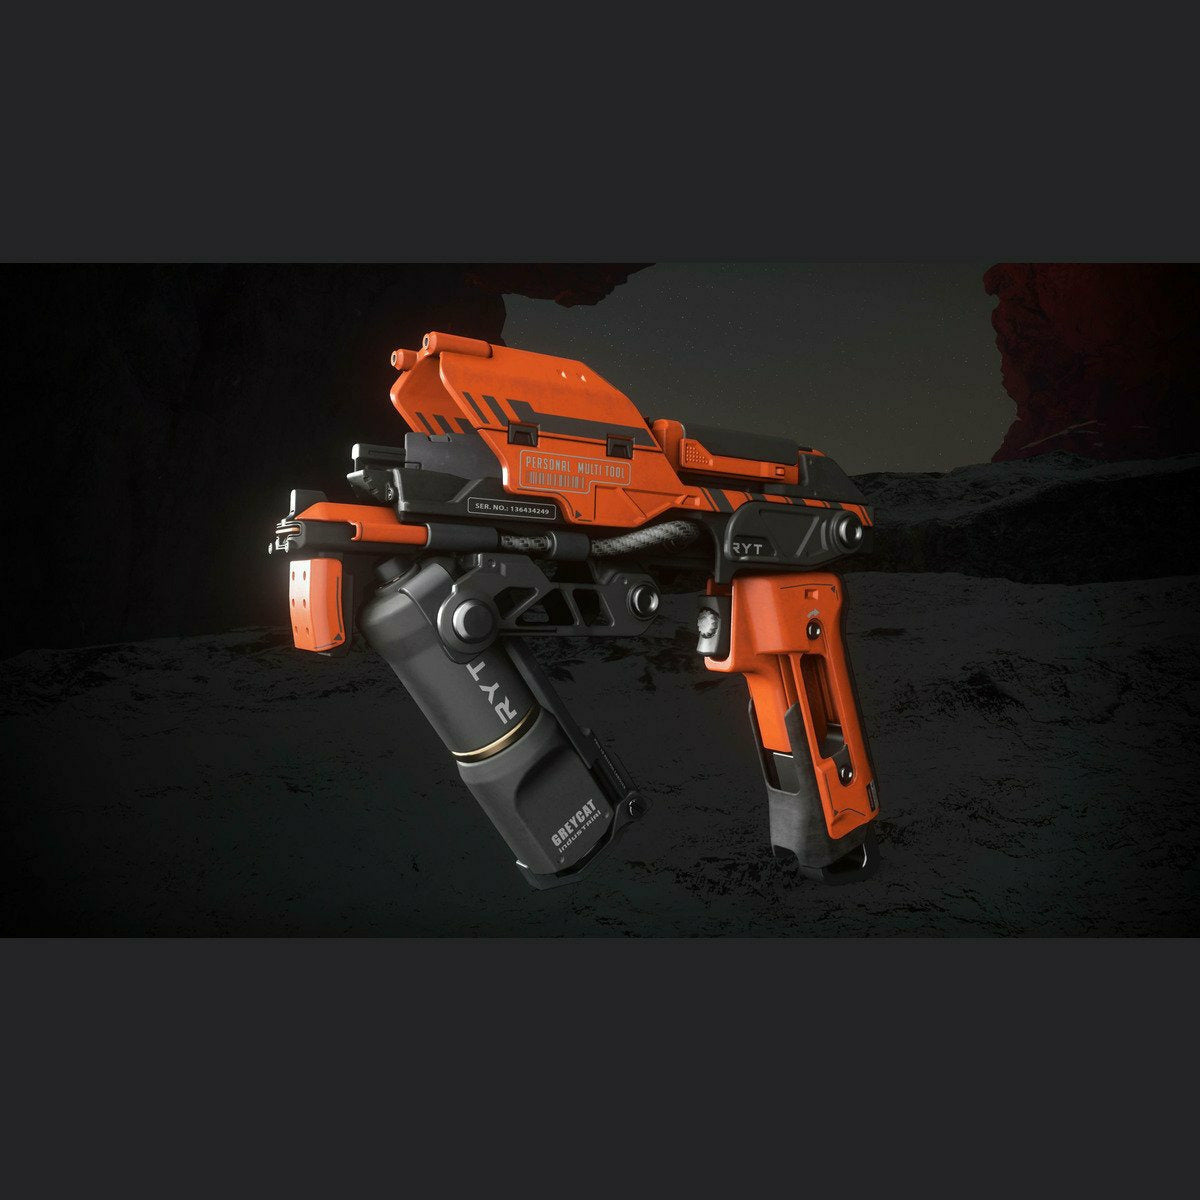 Pyro RYT Harvester Multi-Tool | Space Foundry Marketplace.